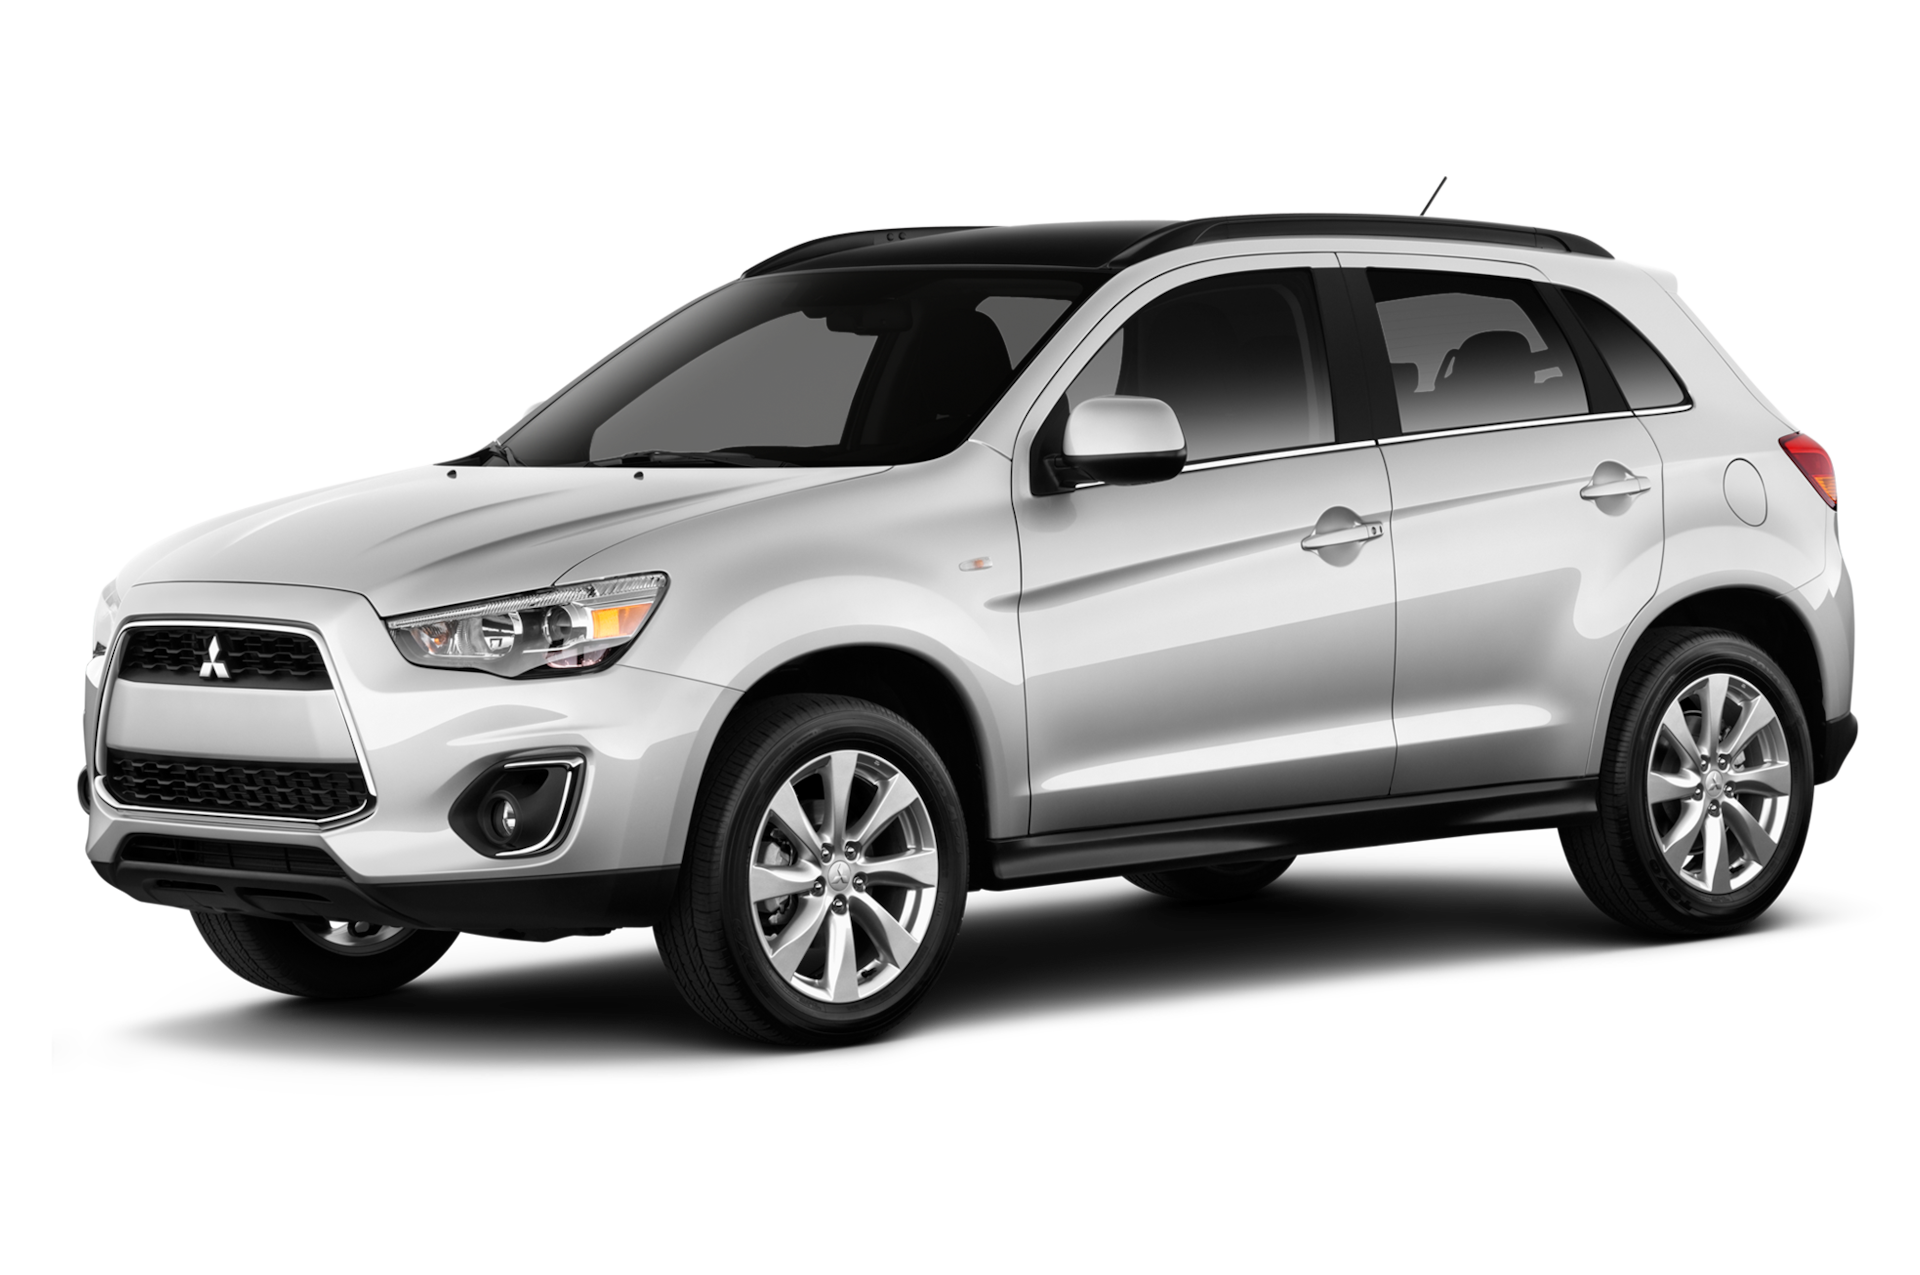 2014 Mitsubishi Outlander Sport Prices, Reviews, and Photos - MotorTrend